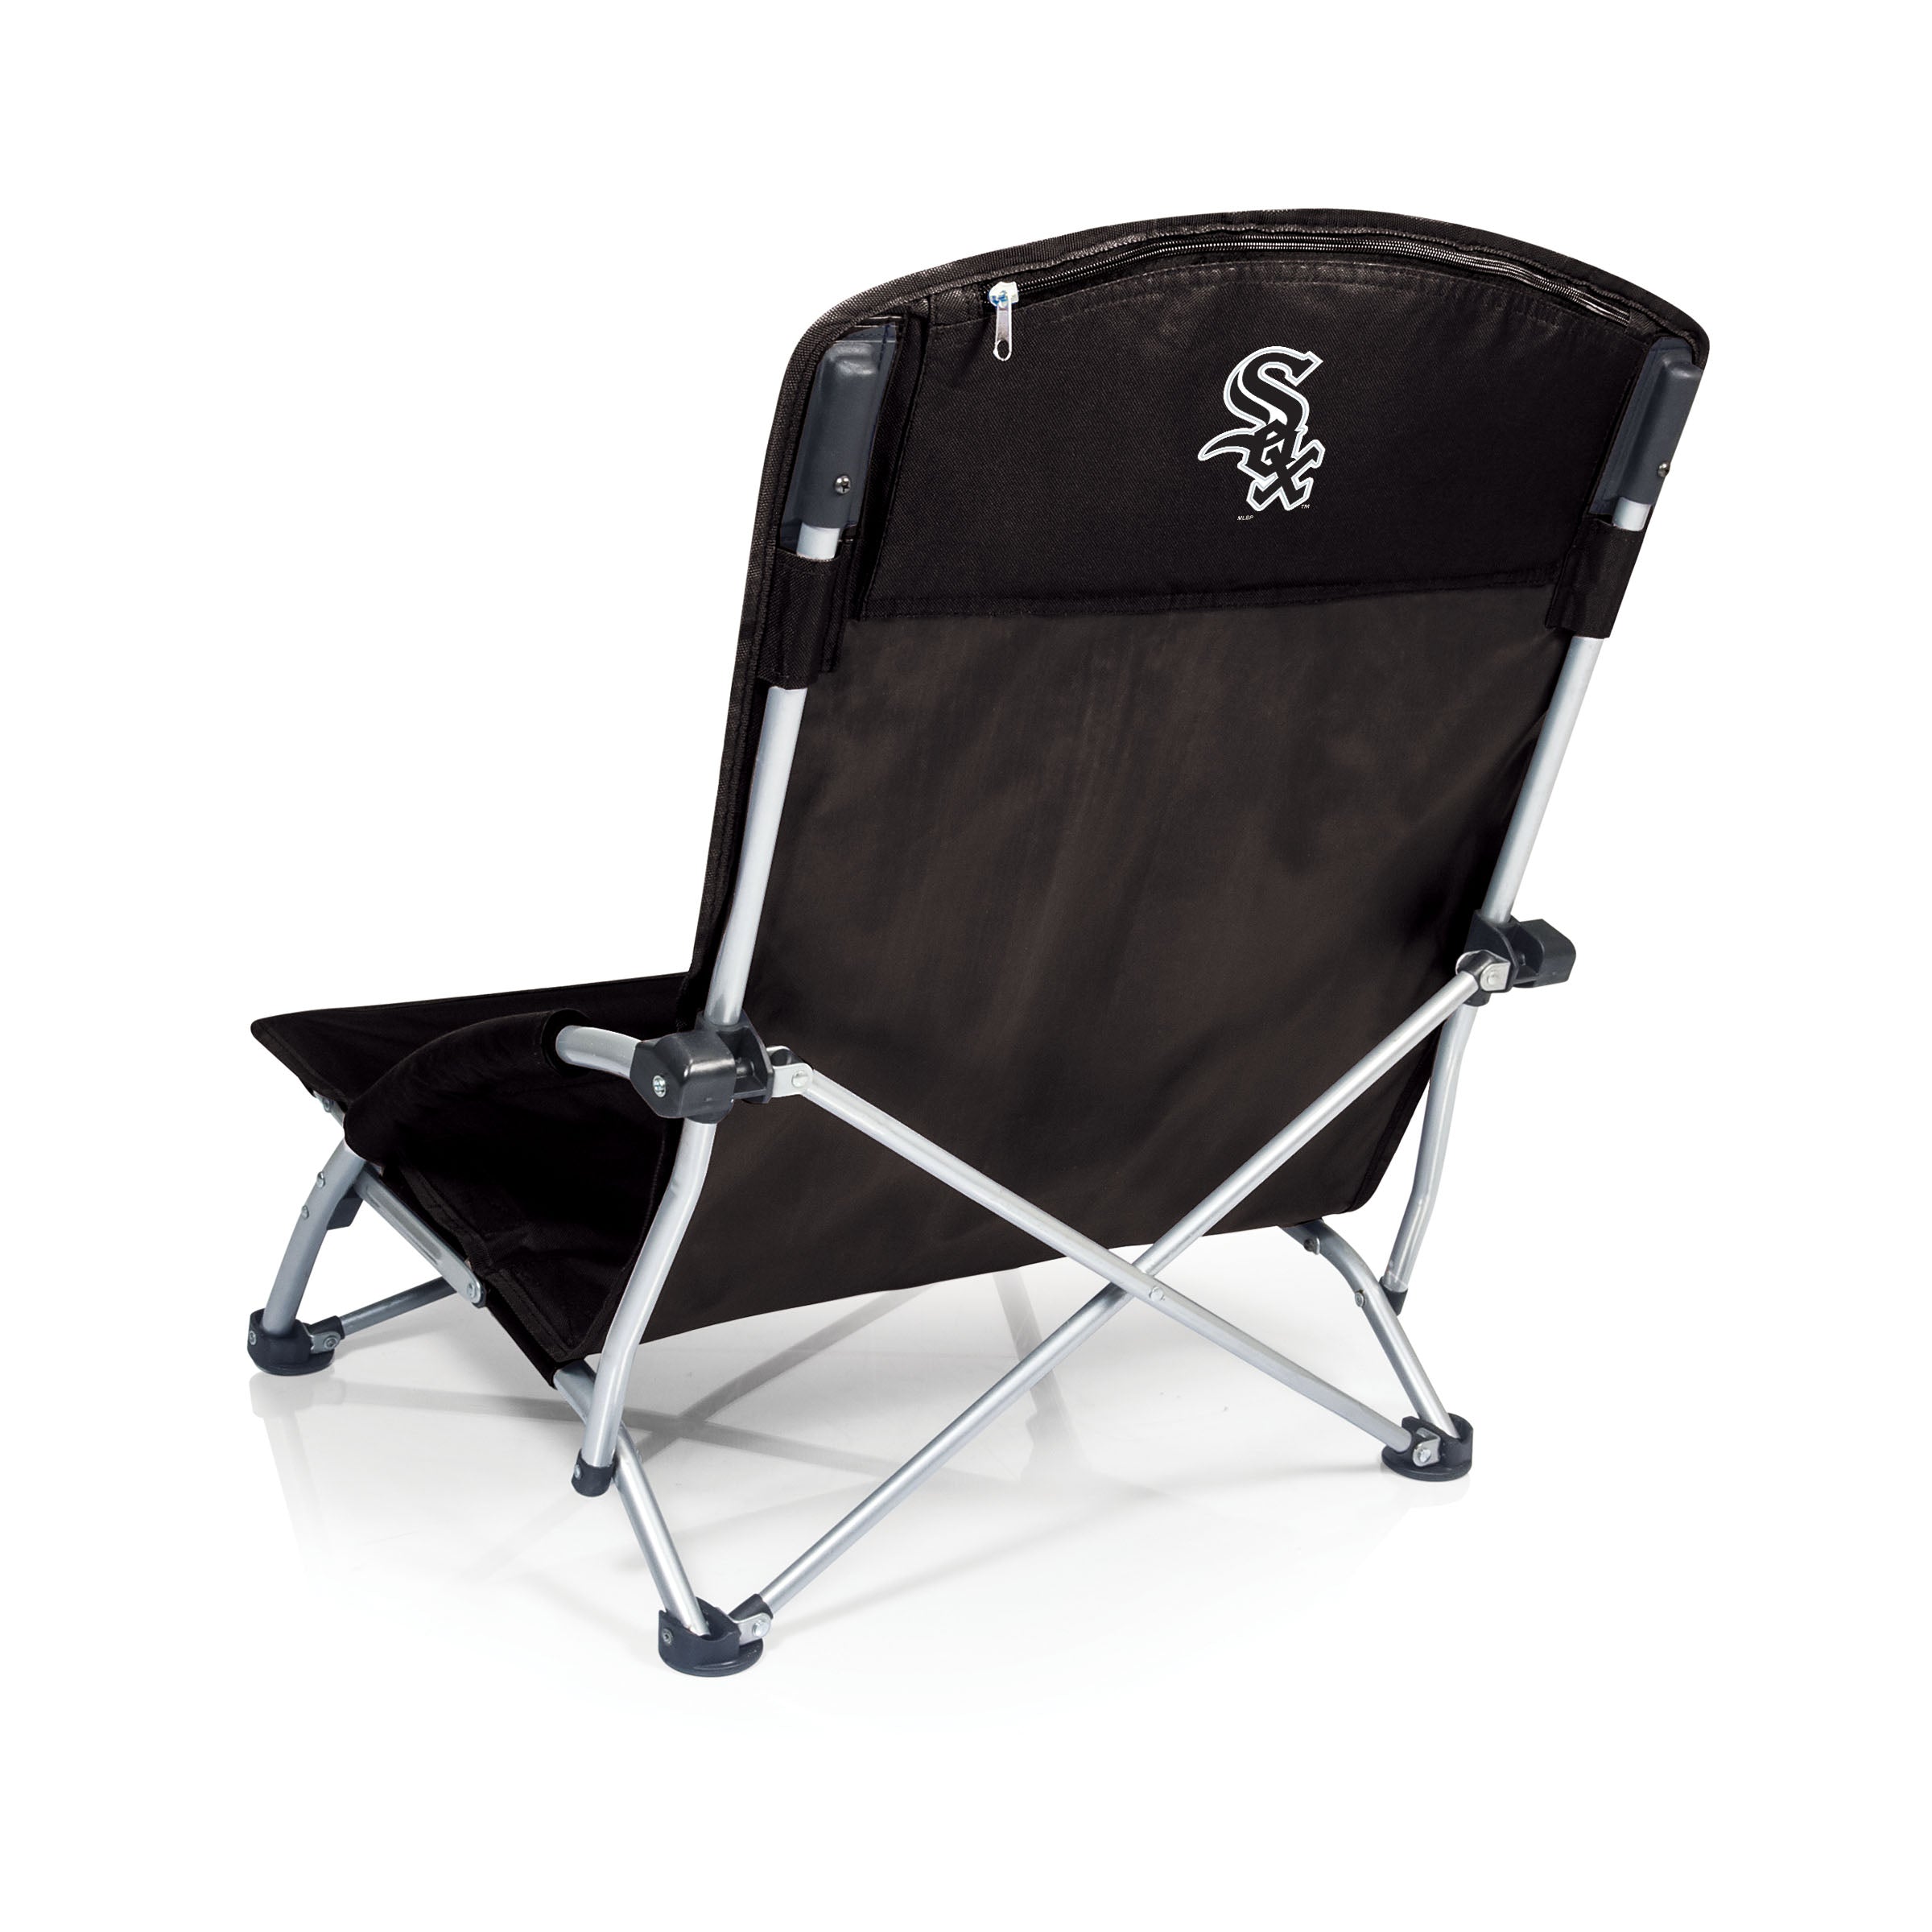 Chicago White Sox - Tranquility Beach Chair with Carry Bag